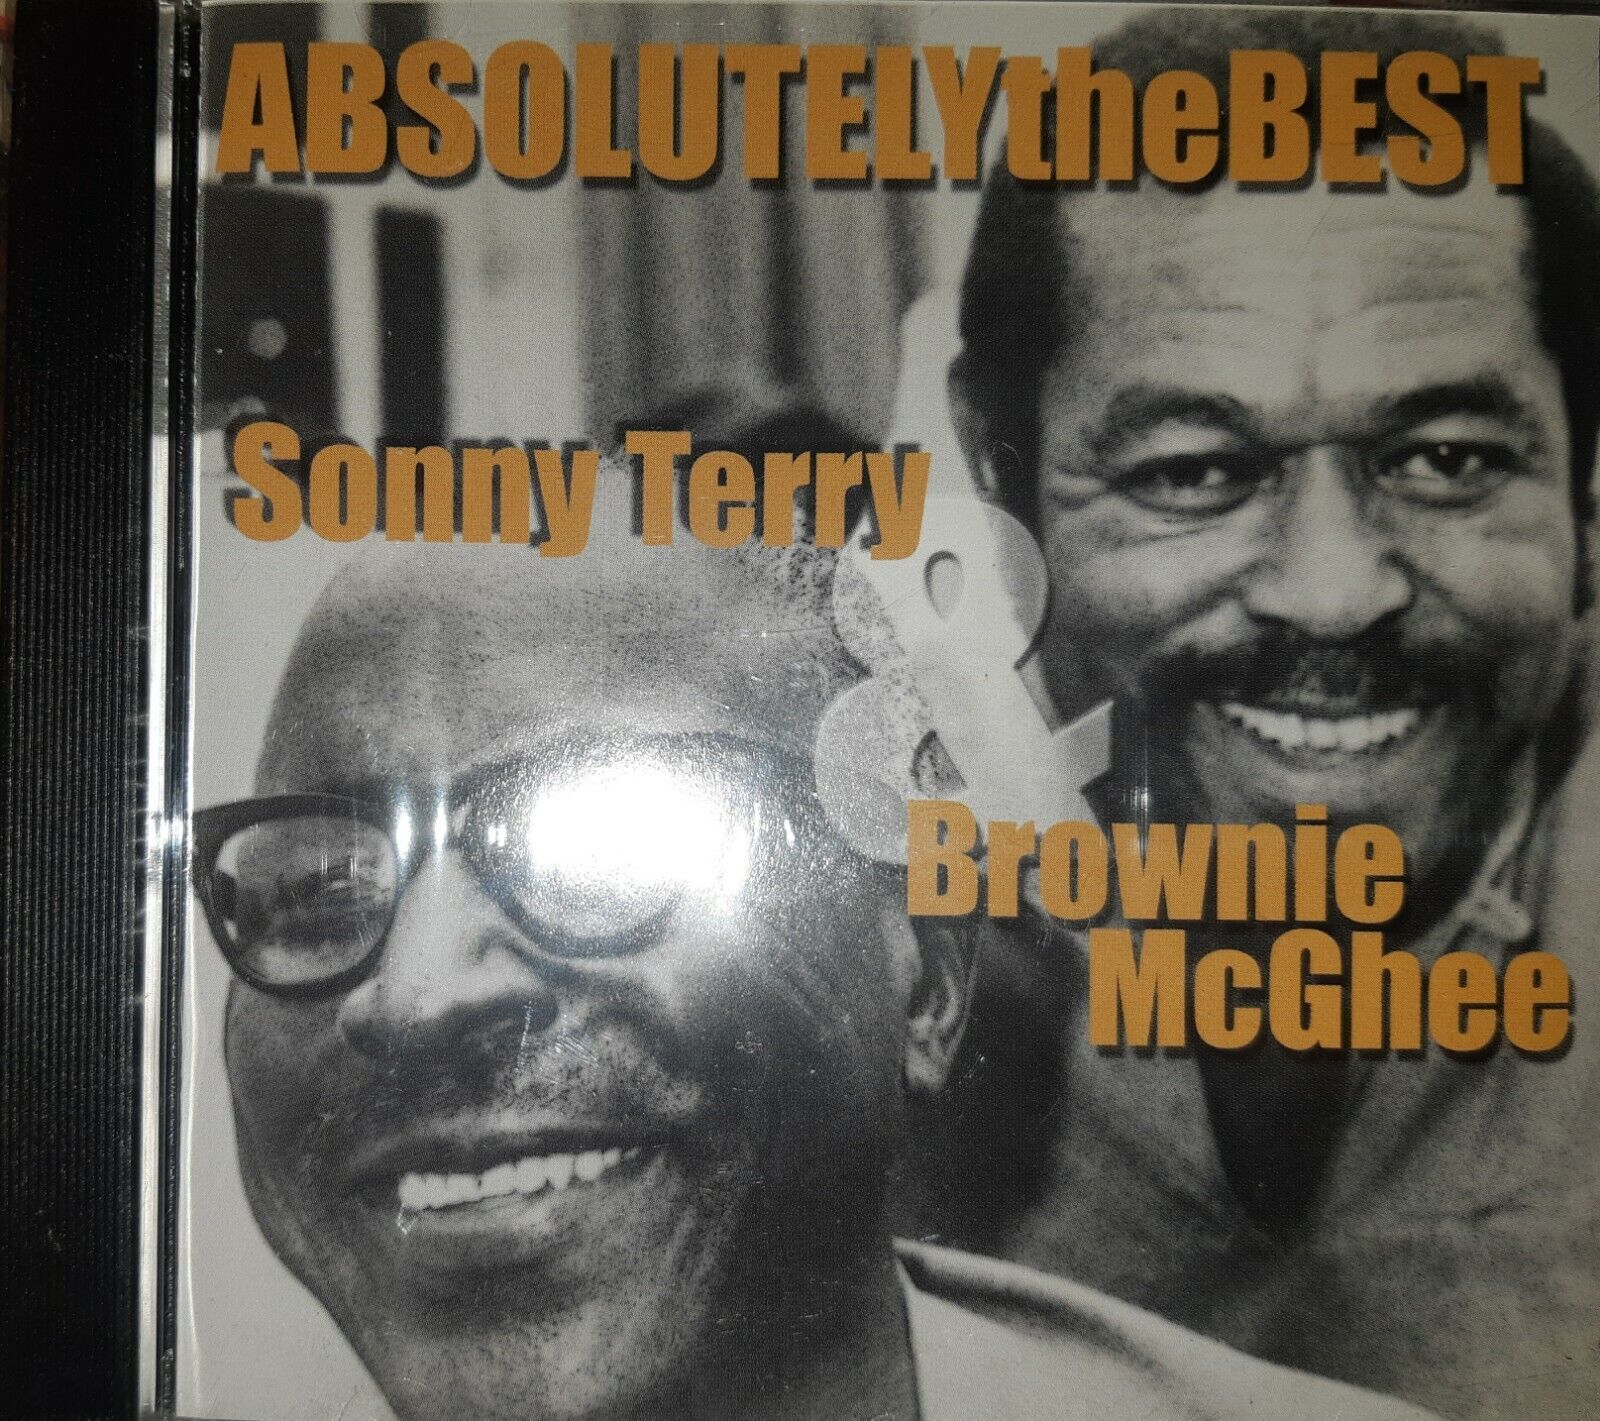 Sonny Terry & Brownie McGhee - Absolutely The Best. CD. Brand New/Sealed. Mint. 